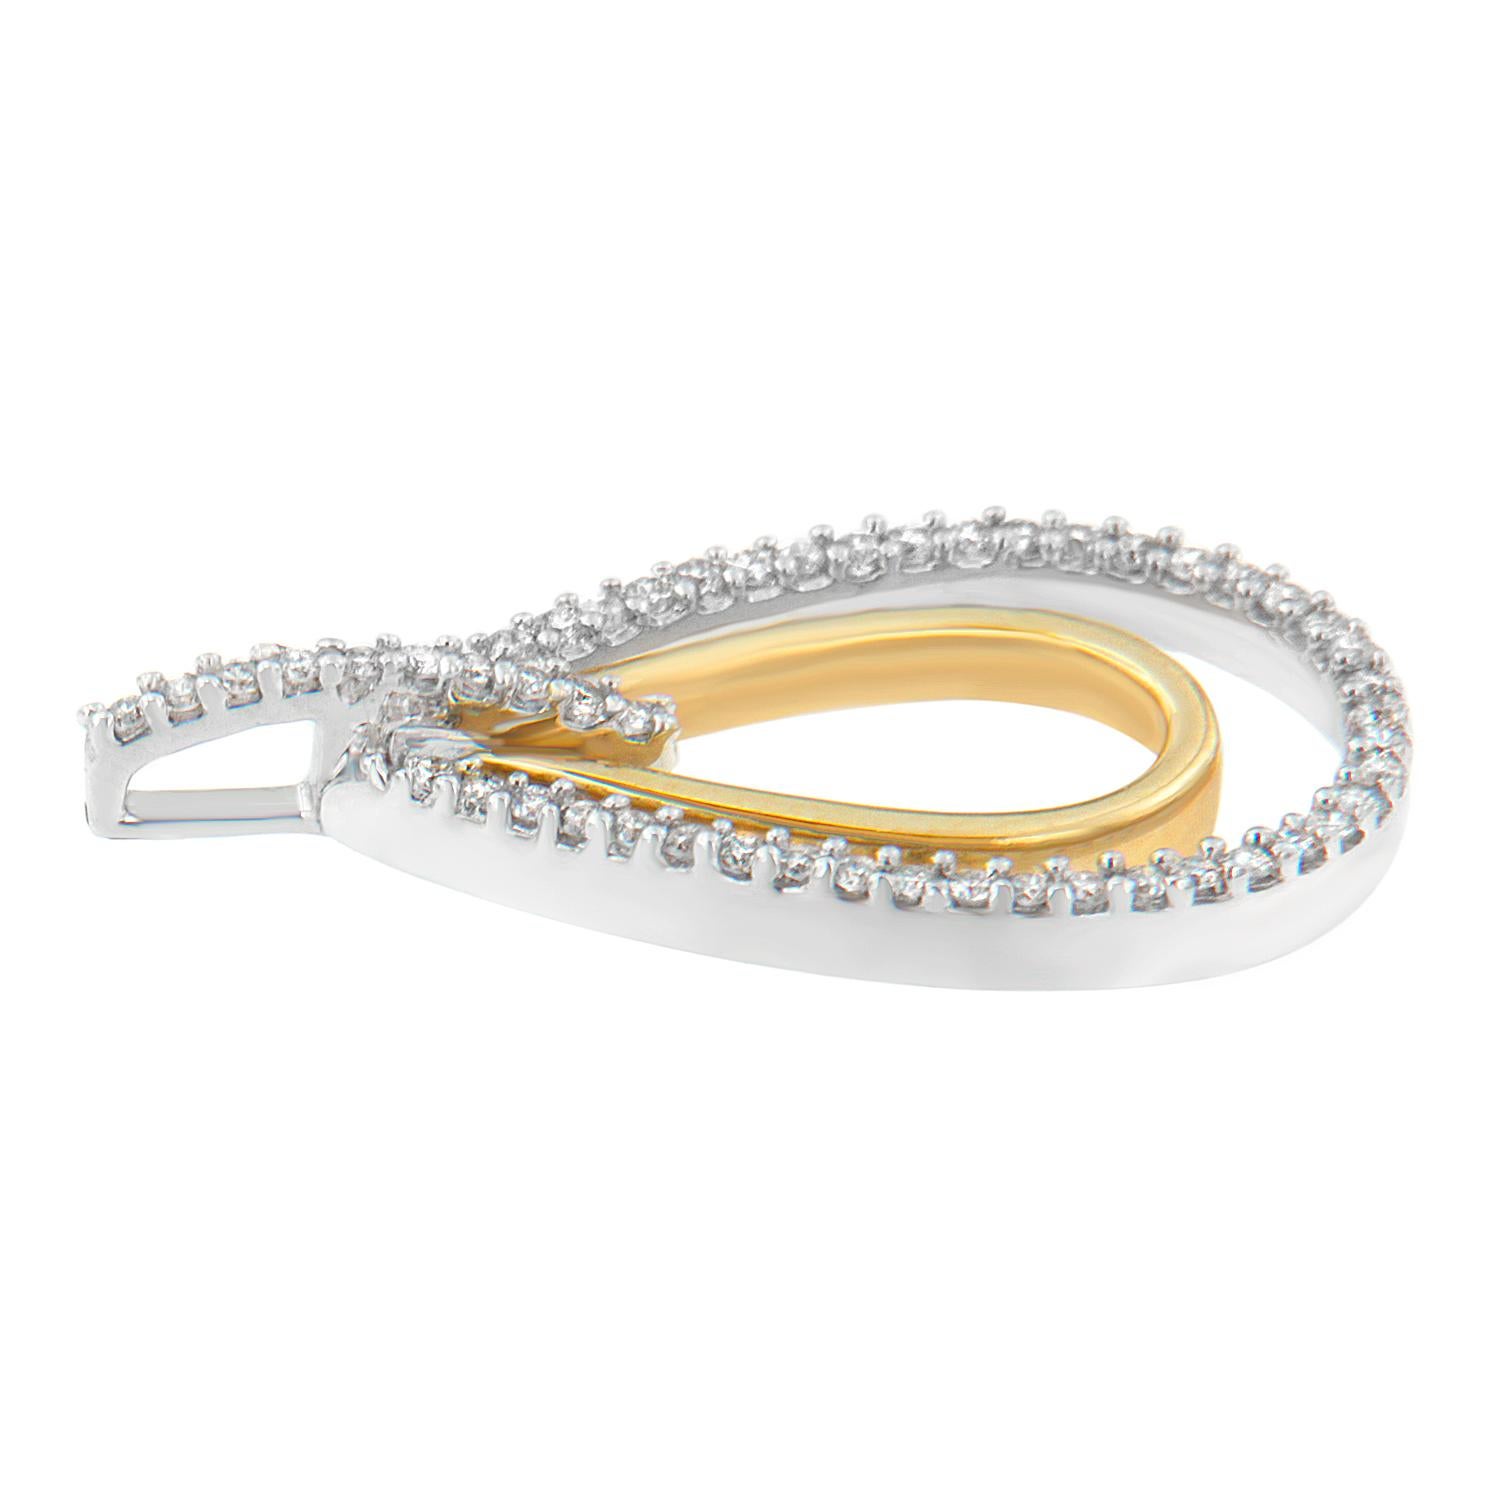 Classic meets contemporary for a chic contrast! This eye-catching pendant flaunts an outer burst of white gold, which sparkles with round diamonds. An inner burst of yellow gold completes the look for impeccable style. This beautiful necklace